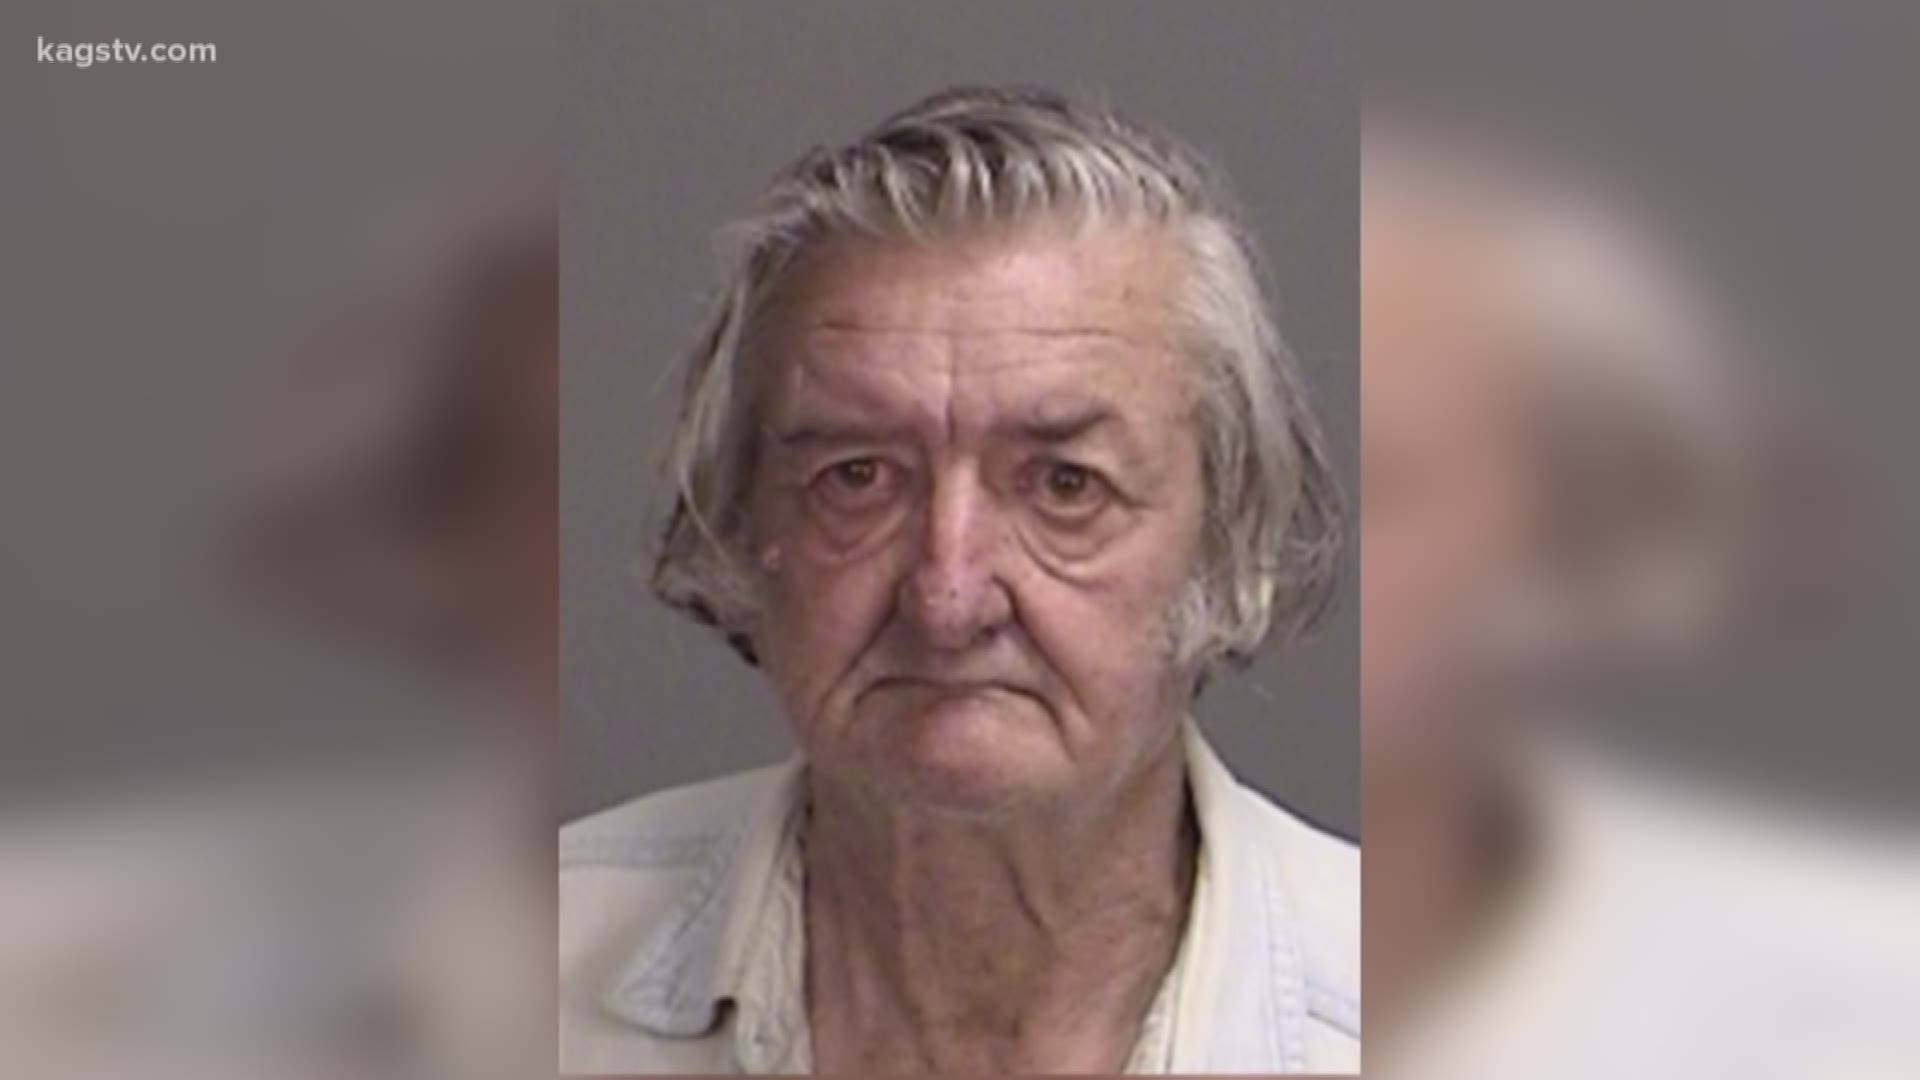 The 74-year-old victim was already using a cane to support himself, police said.